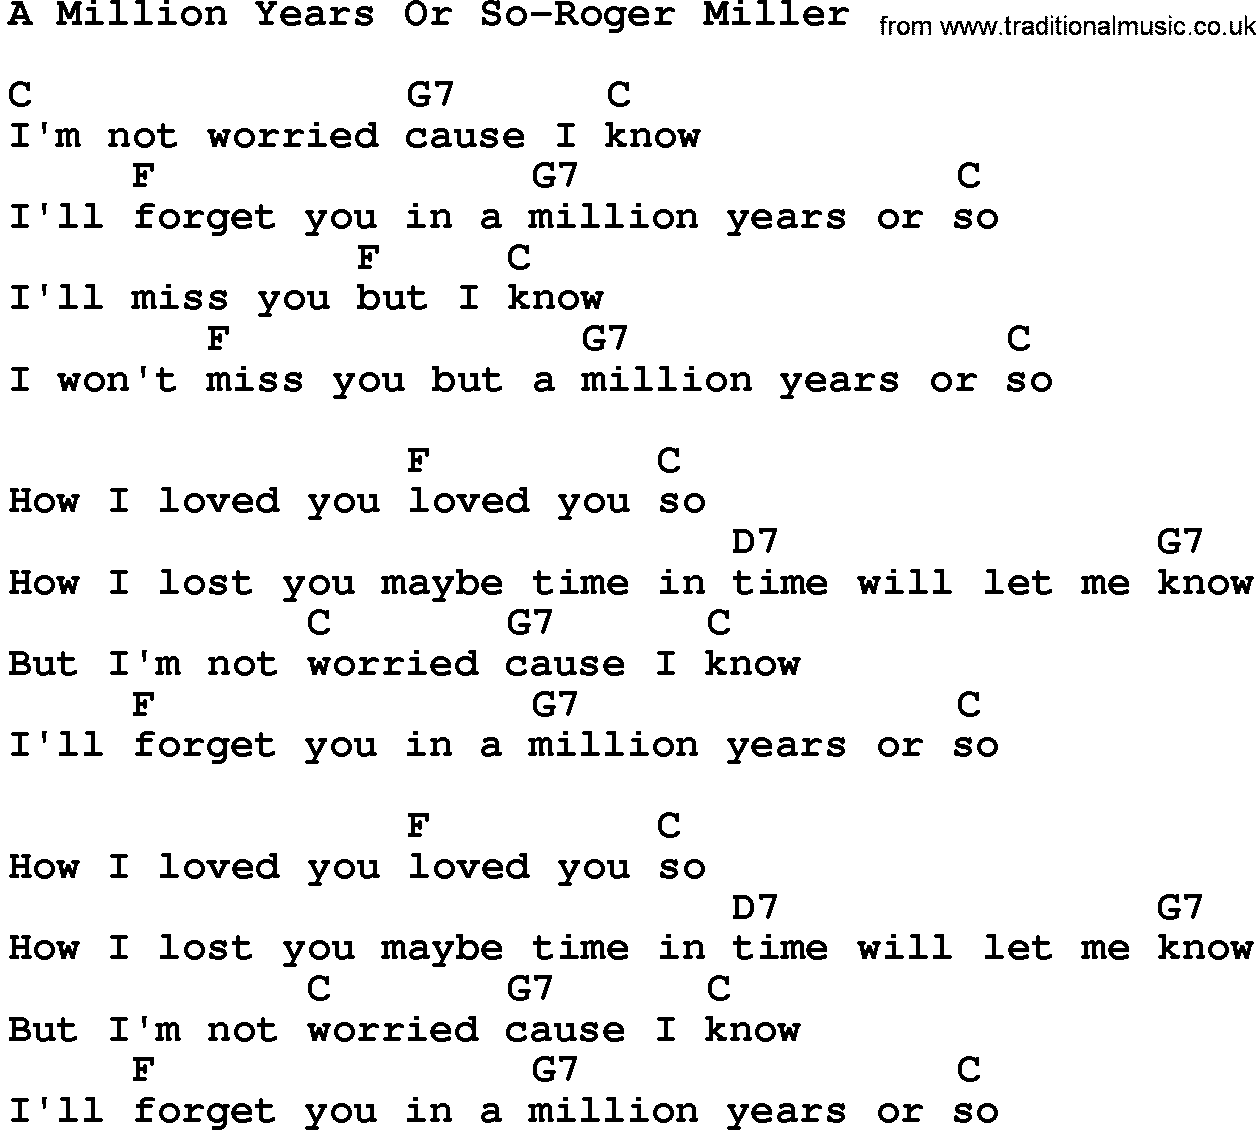 Country music song: A Million Years Or So-Roger Miller lyrics and chords